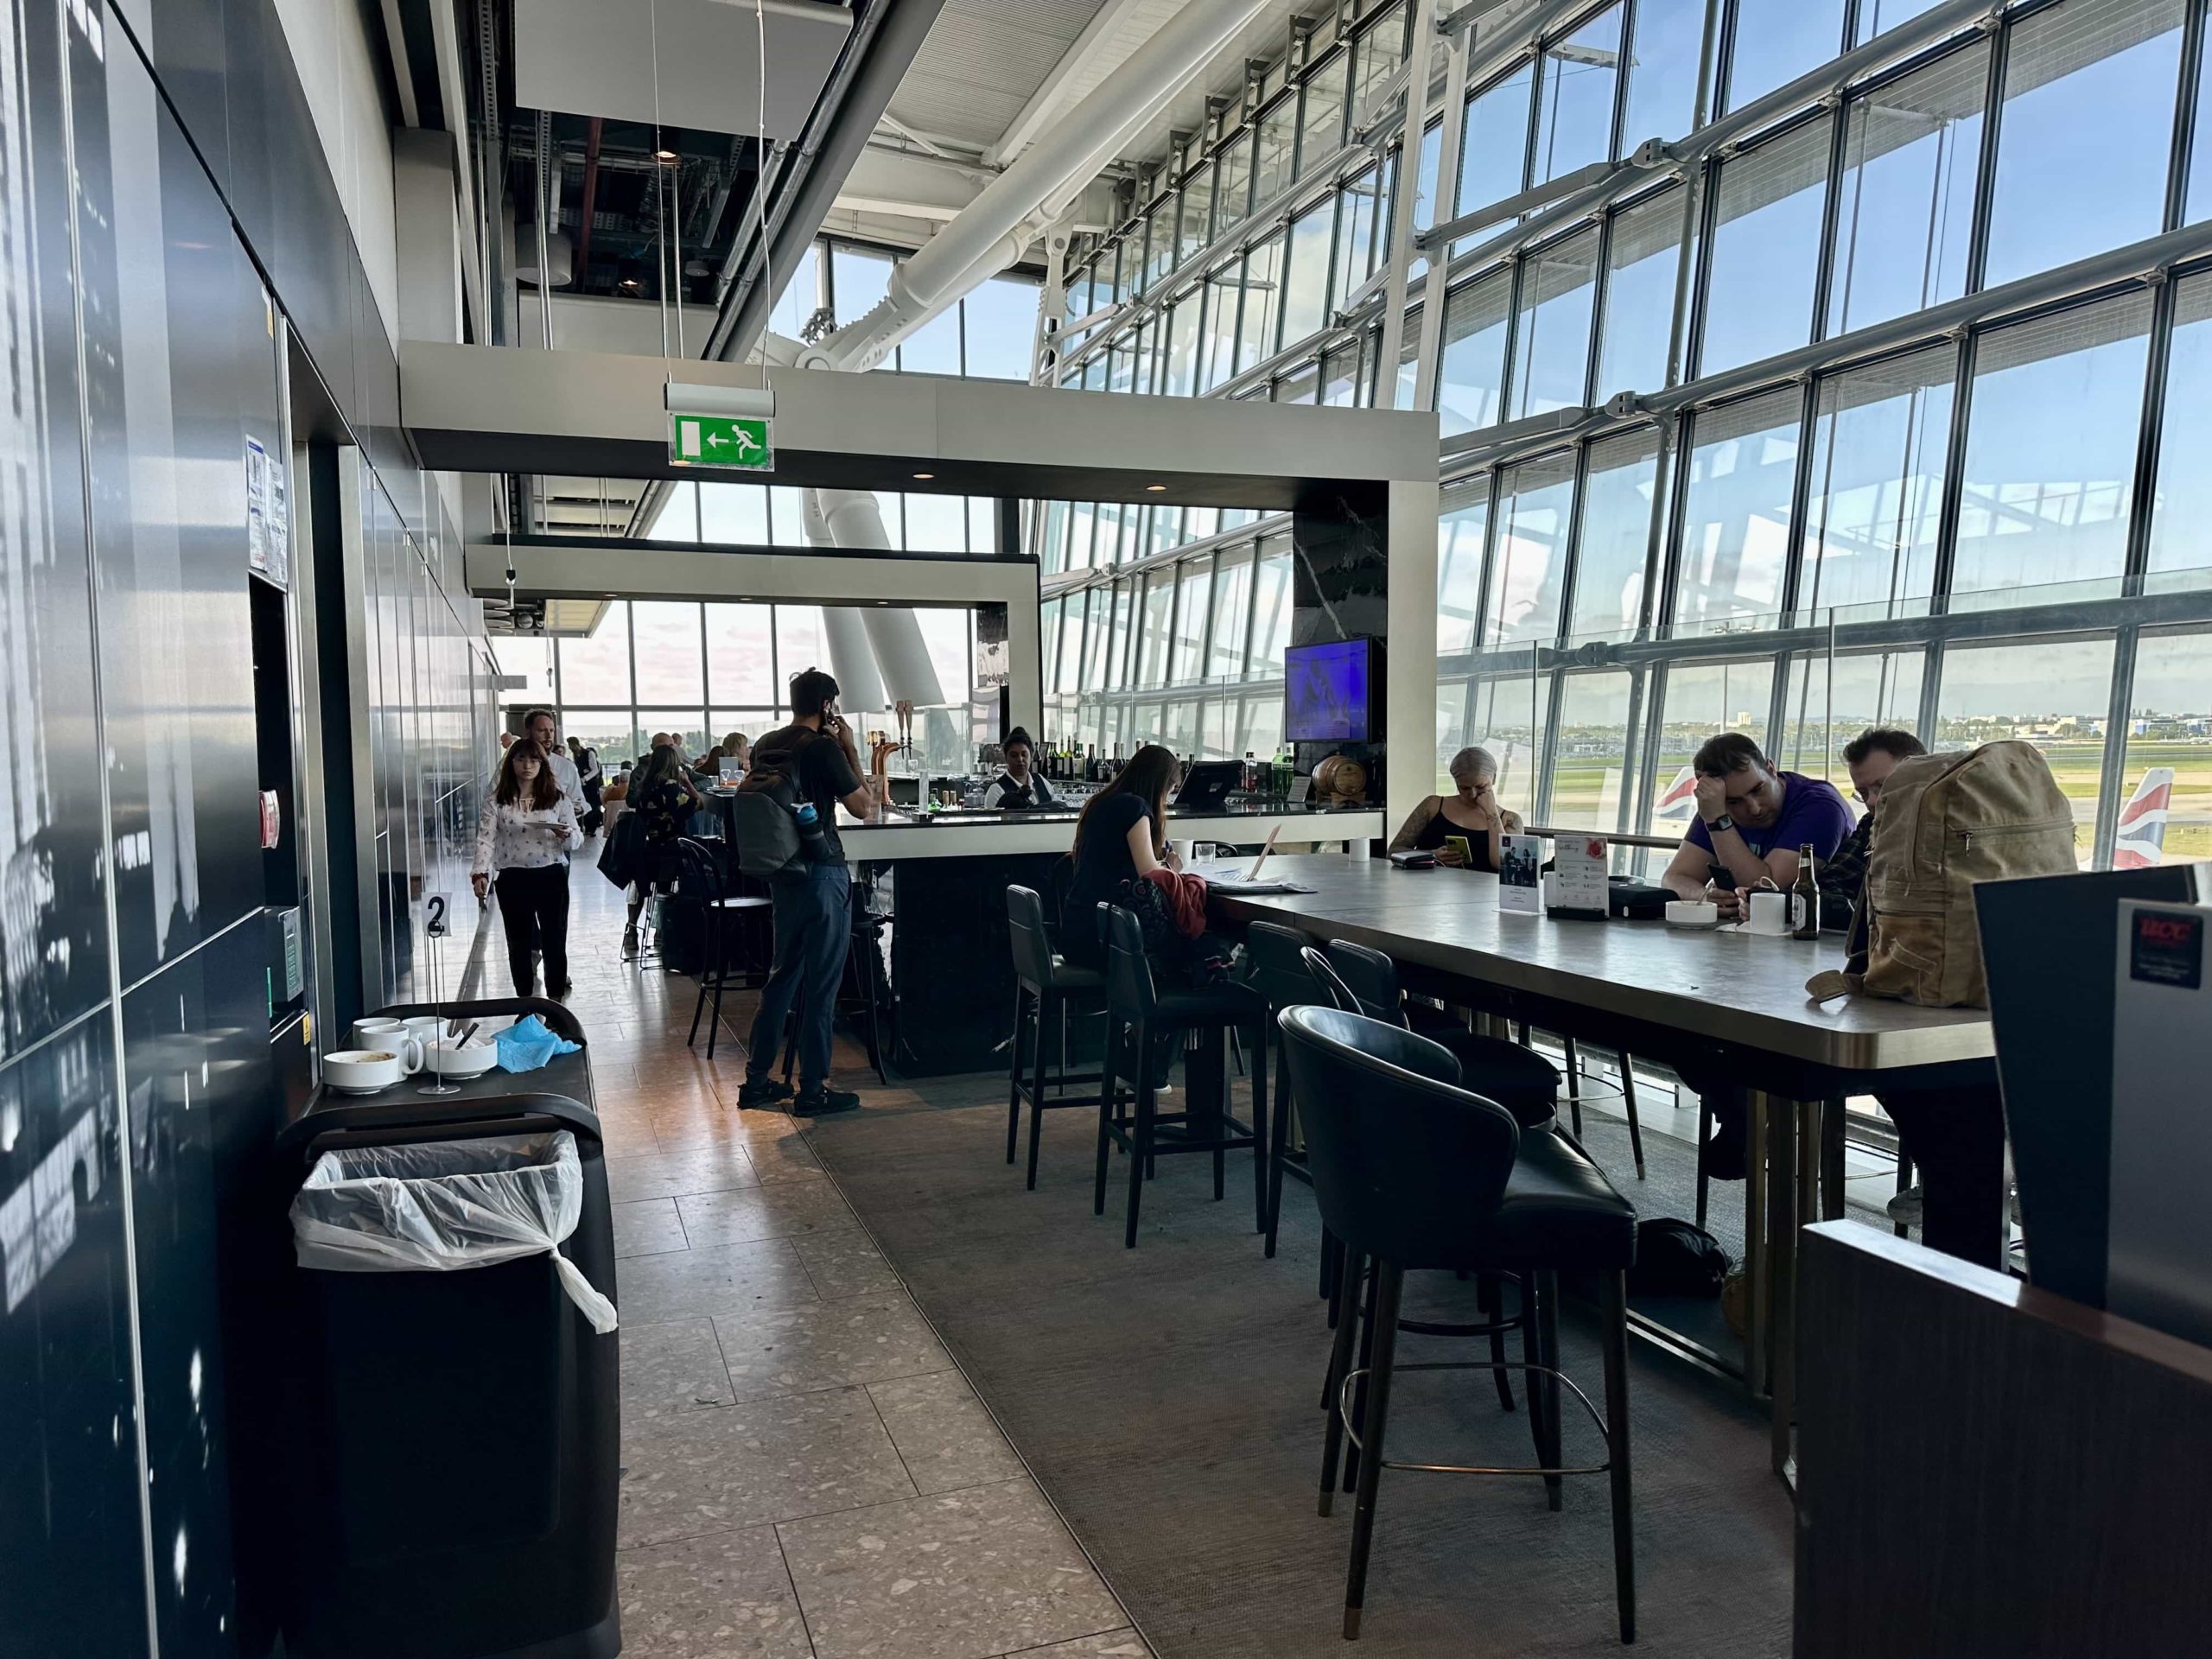 An island-style workstation/dining area next to a bar in an airport lounge